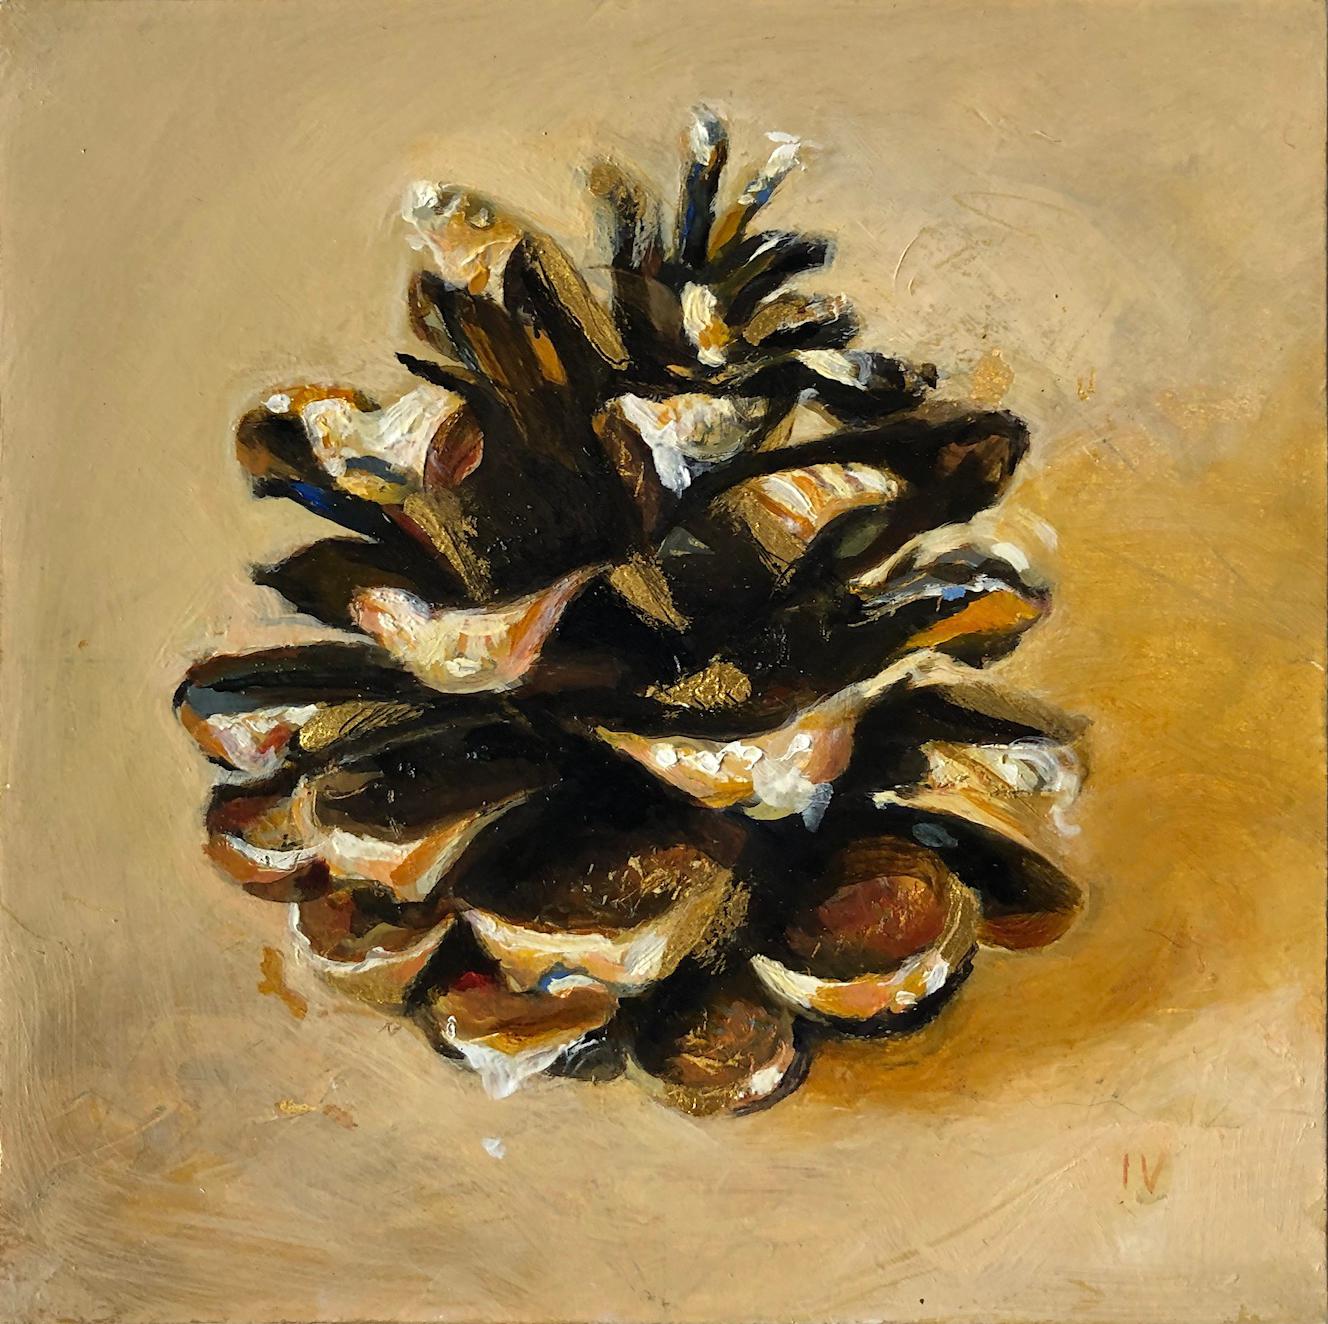 Pinecone #12 (Contemporary Realist Still Life of Conifer Cone with Gold Leaf)